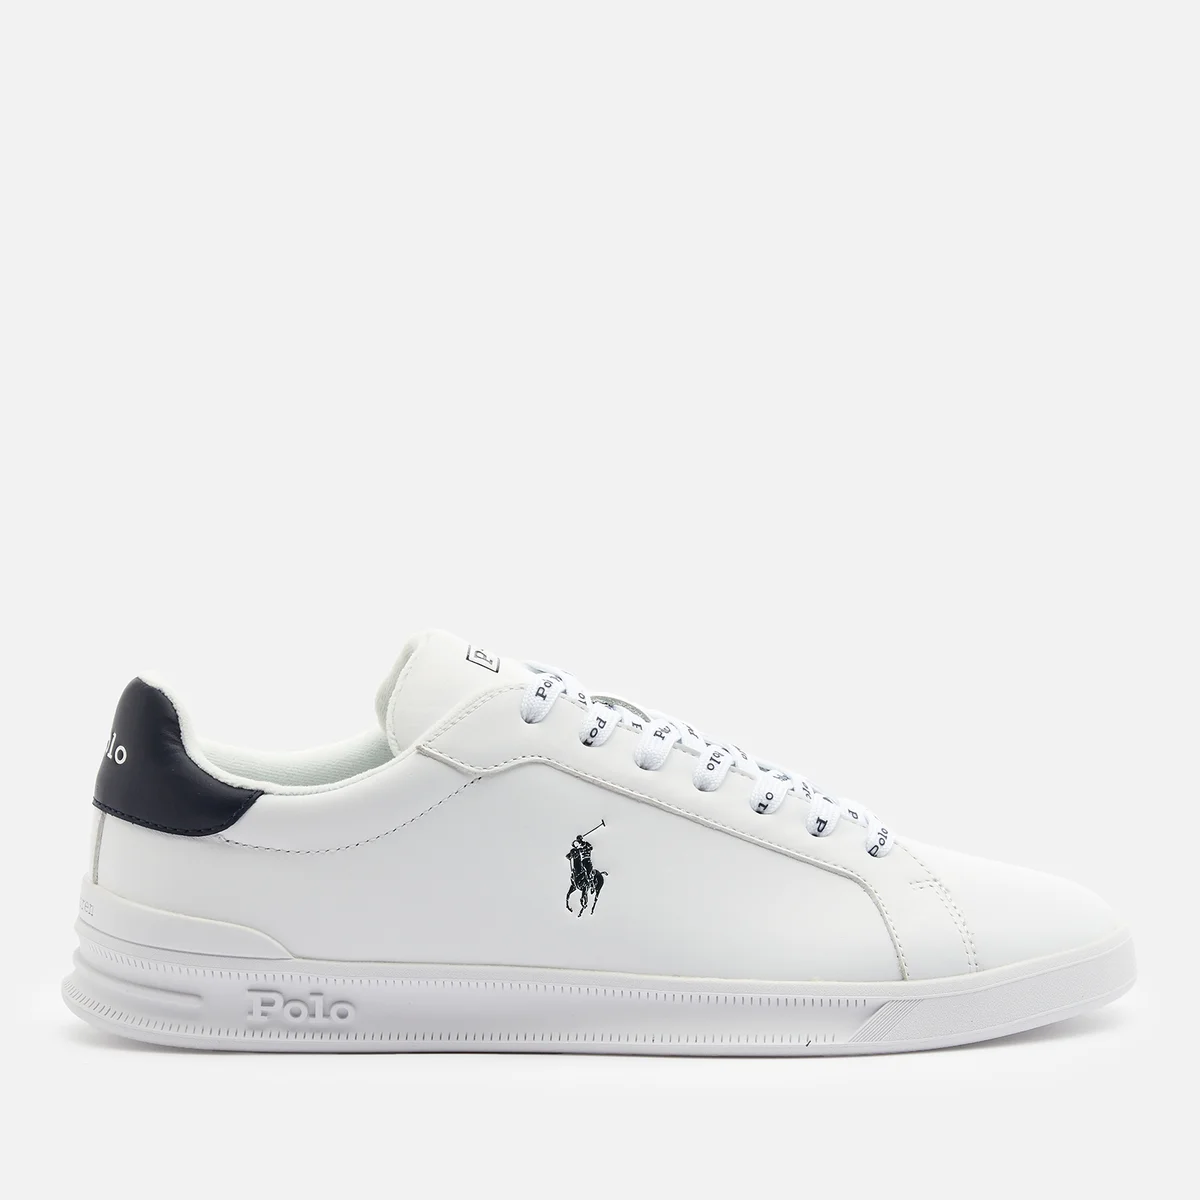 Polo Ralph Lauren Men's Heritage Court Leather Low Top Trainers - White/Newport Navy Image 1